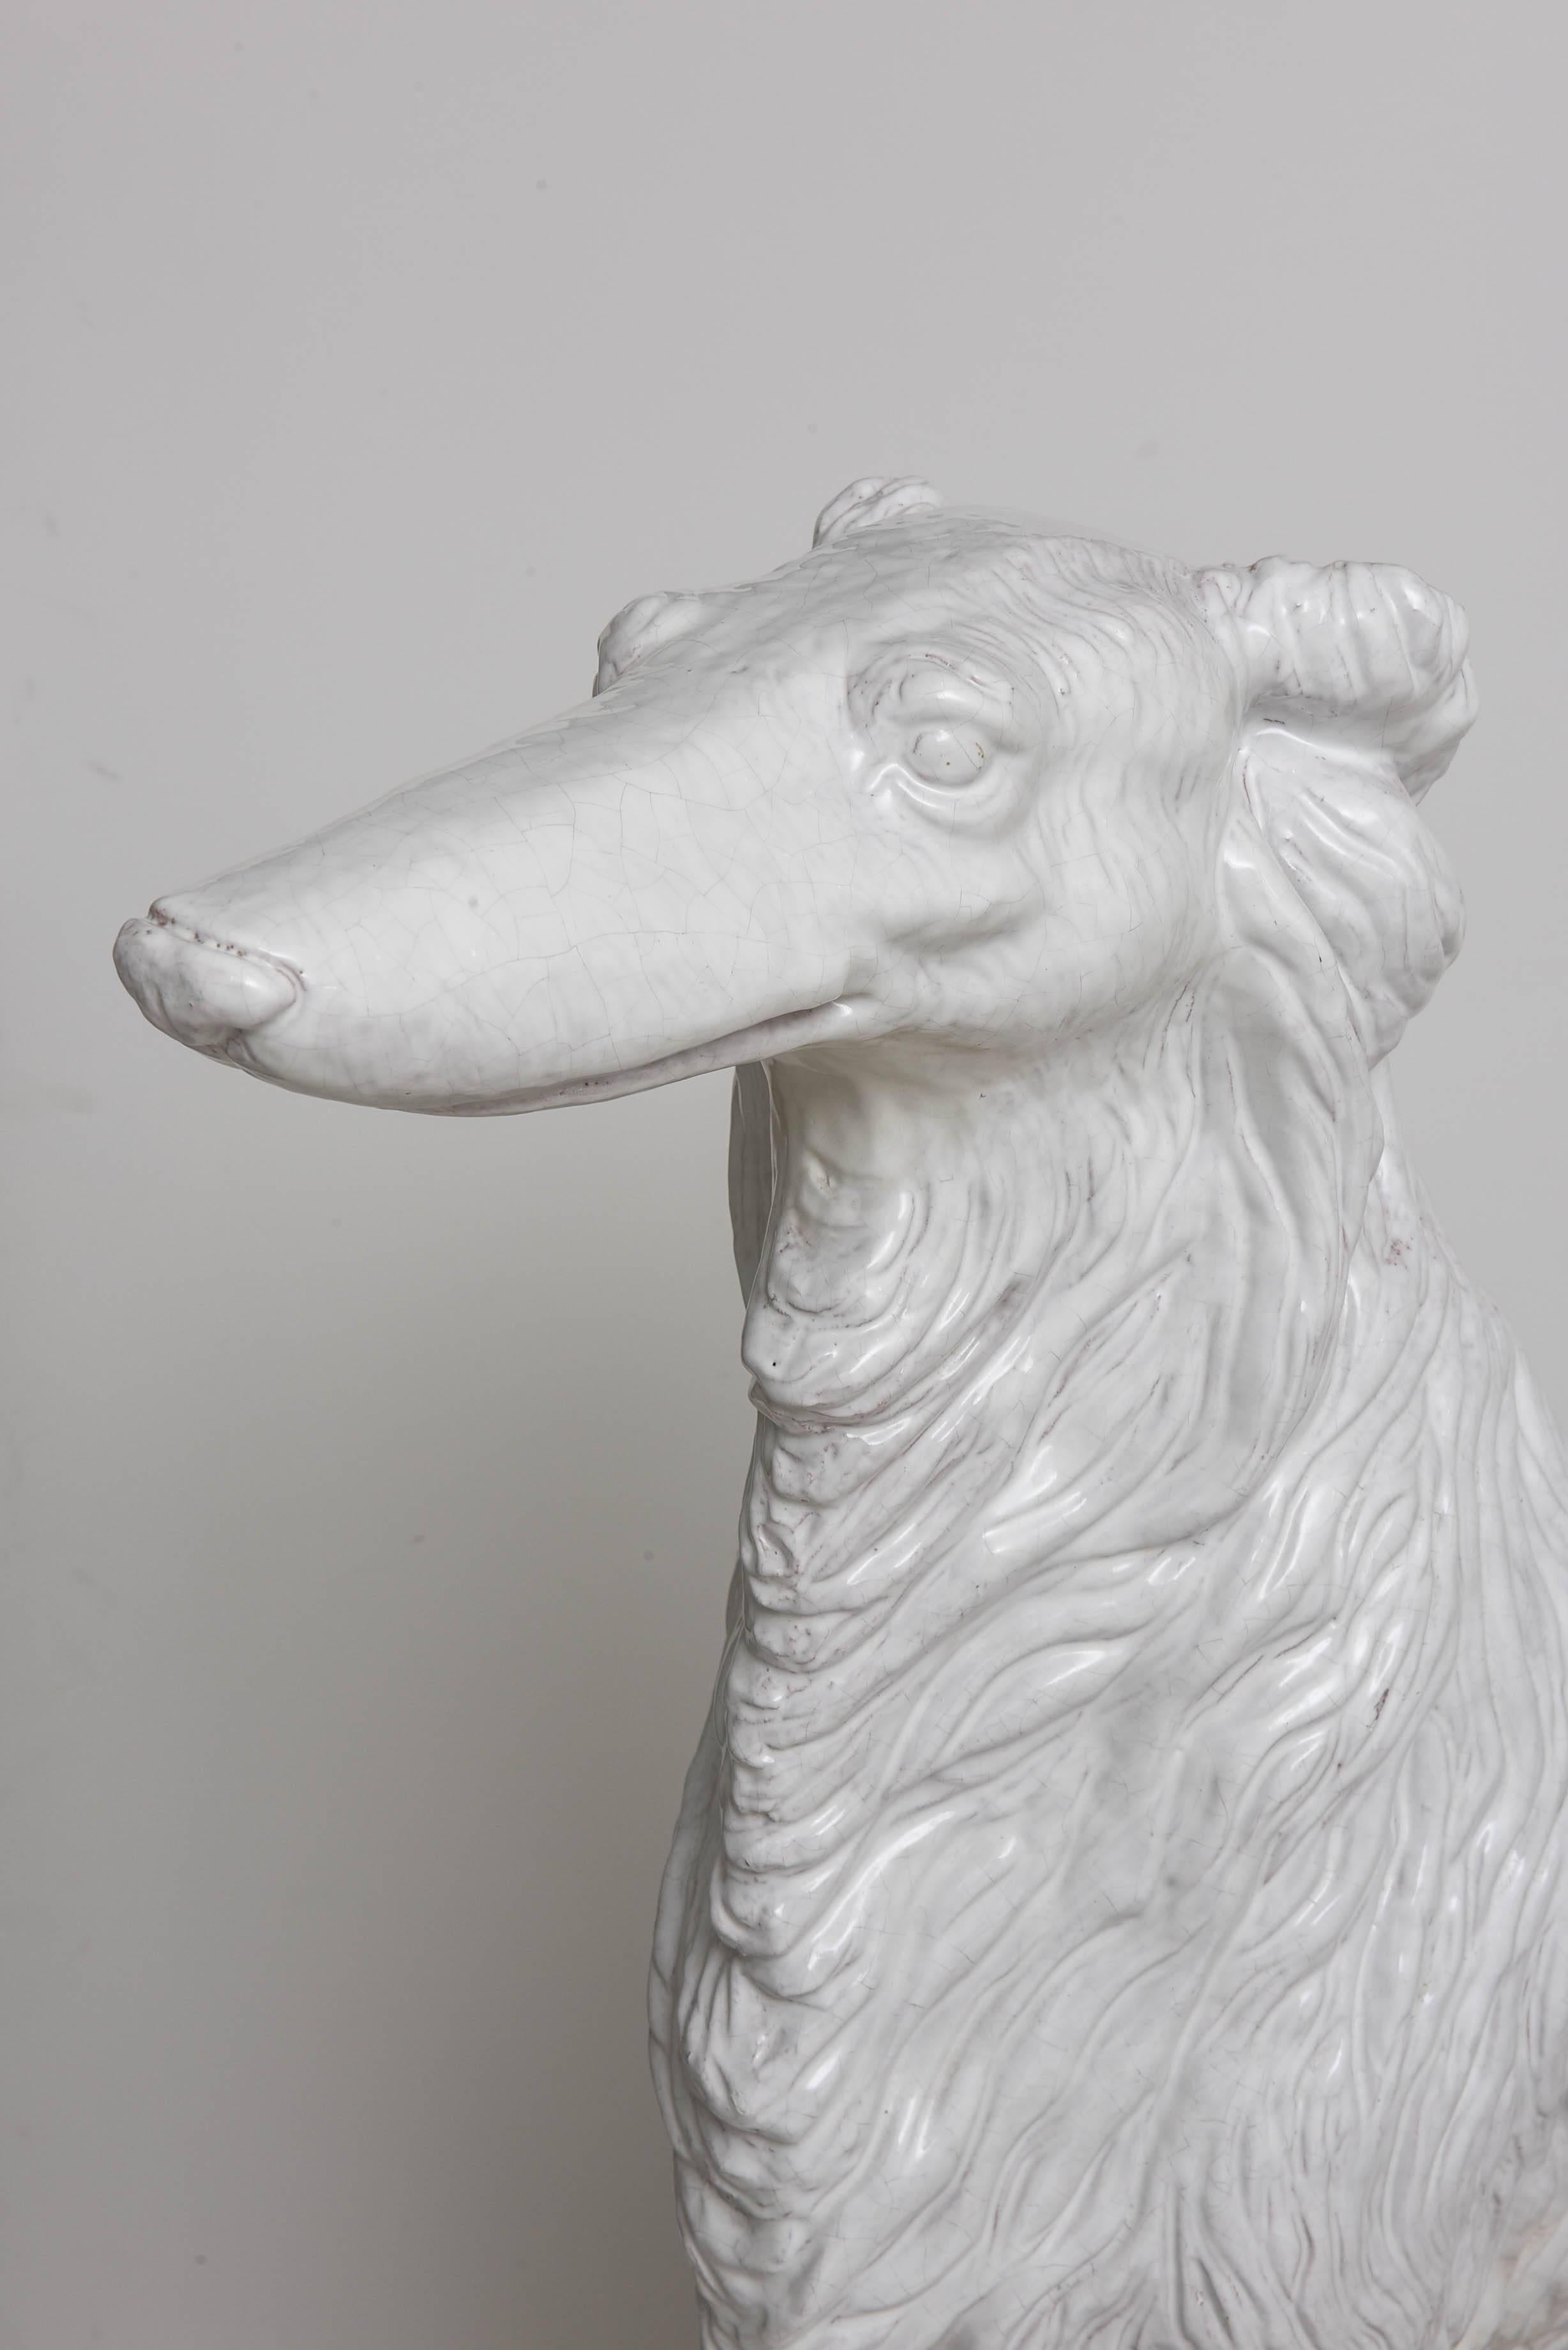 Life-sized Russian wolfhound in white glazed terracotta. Made in Italy.